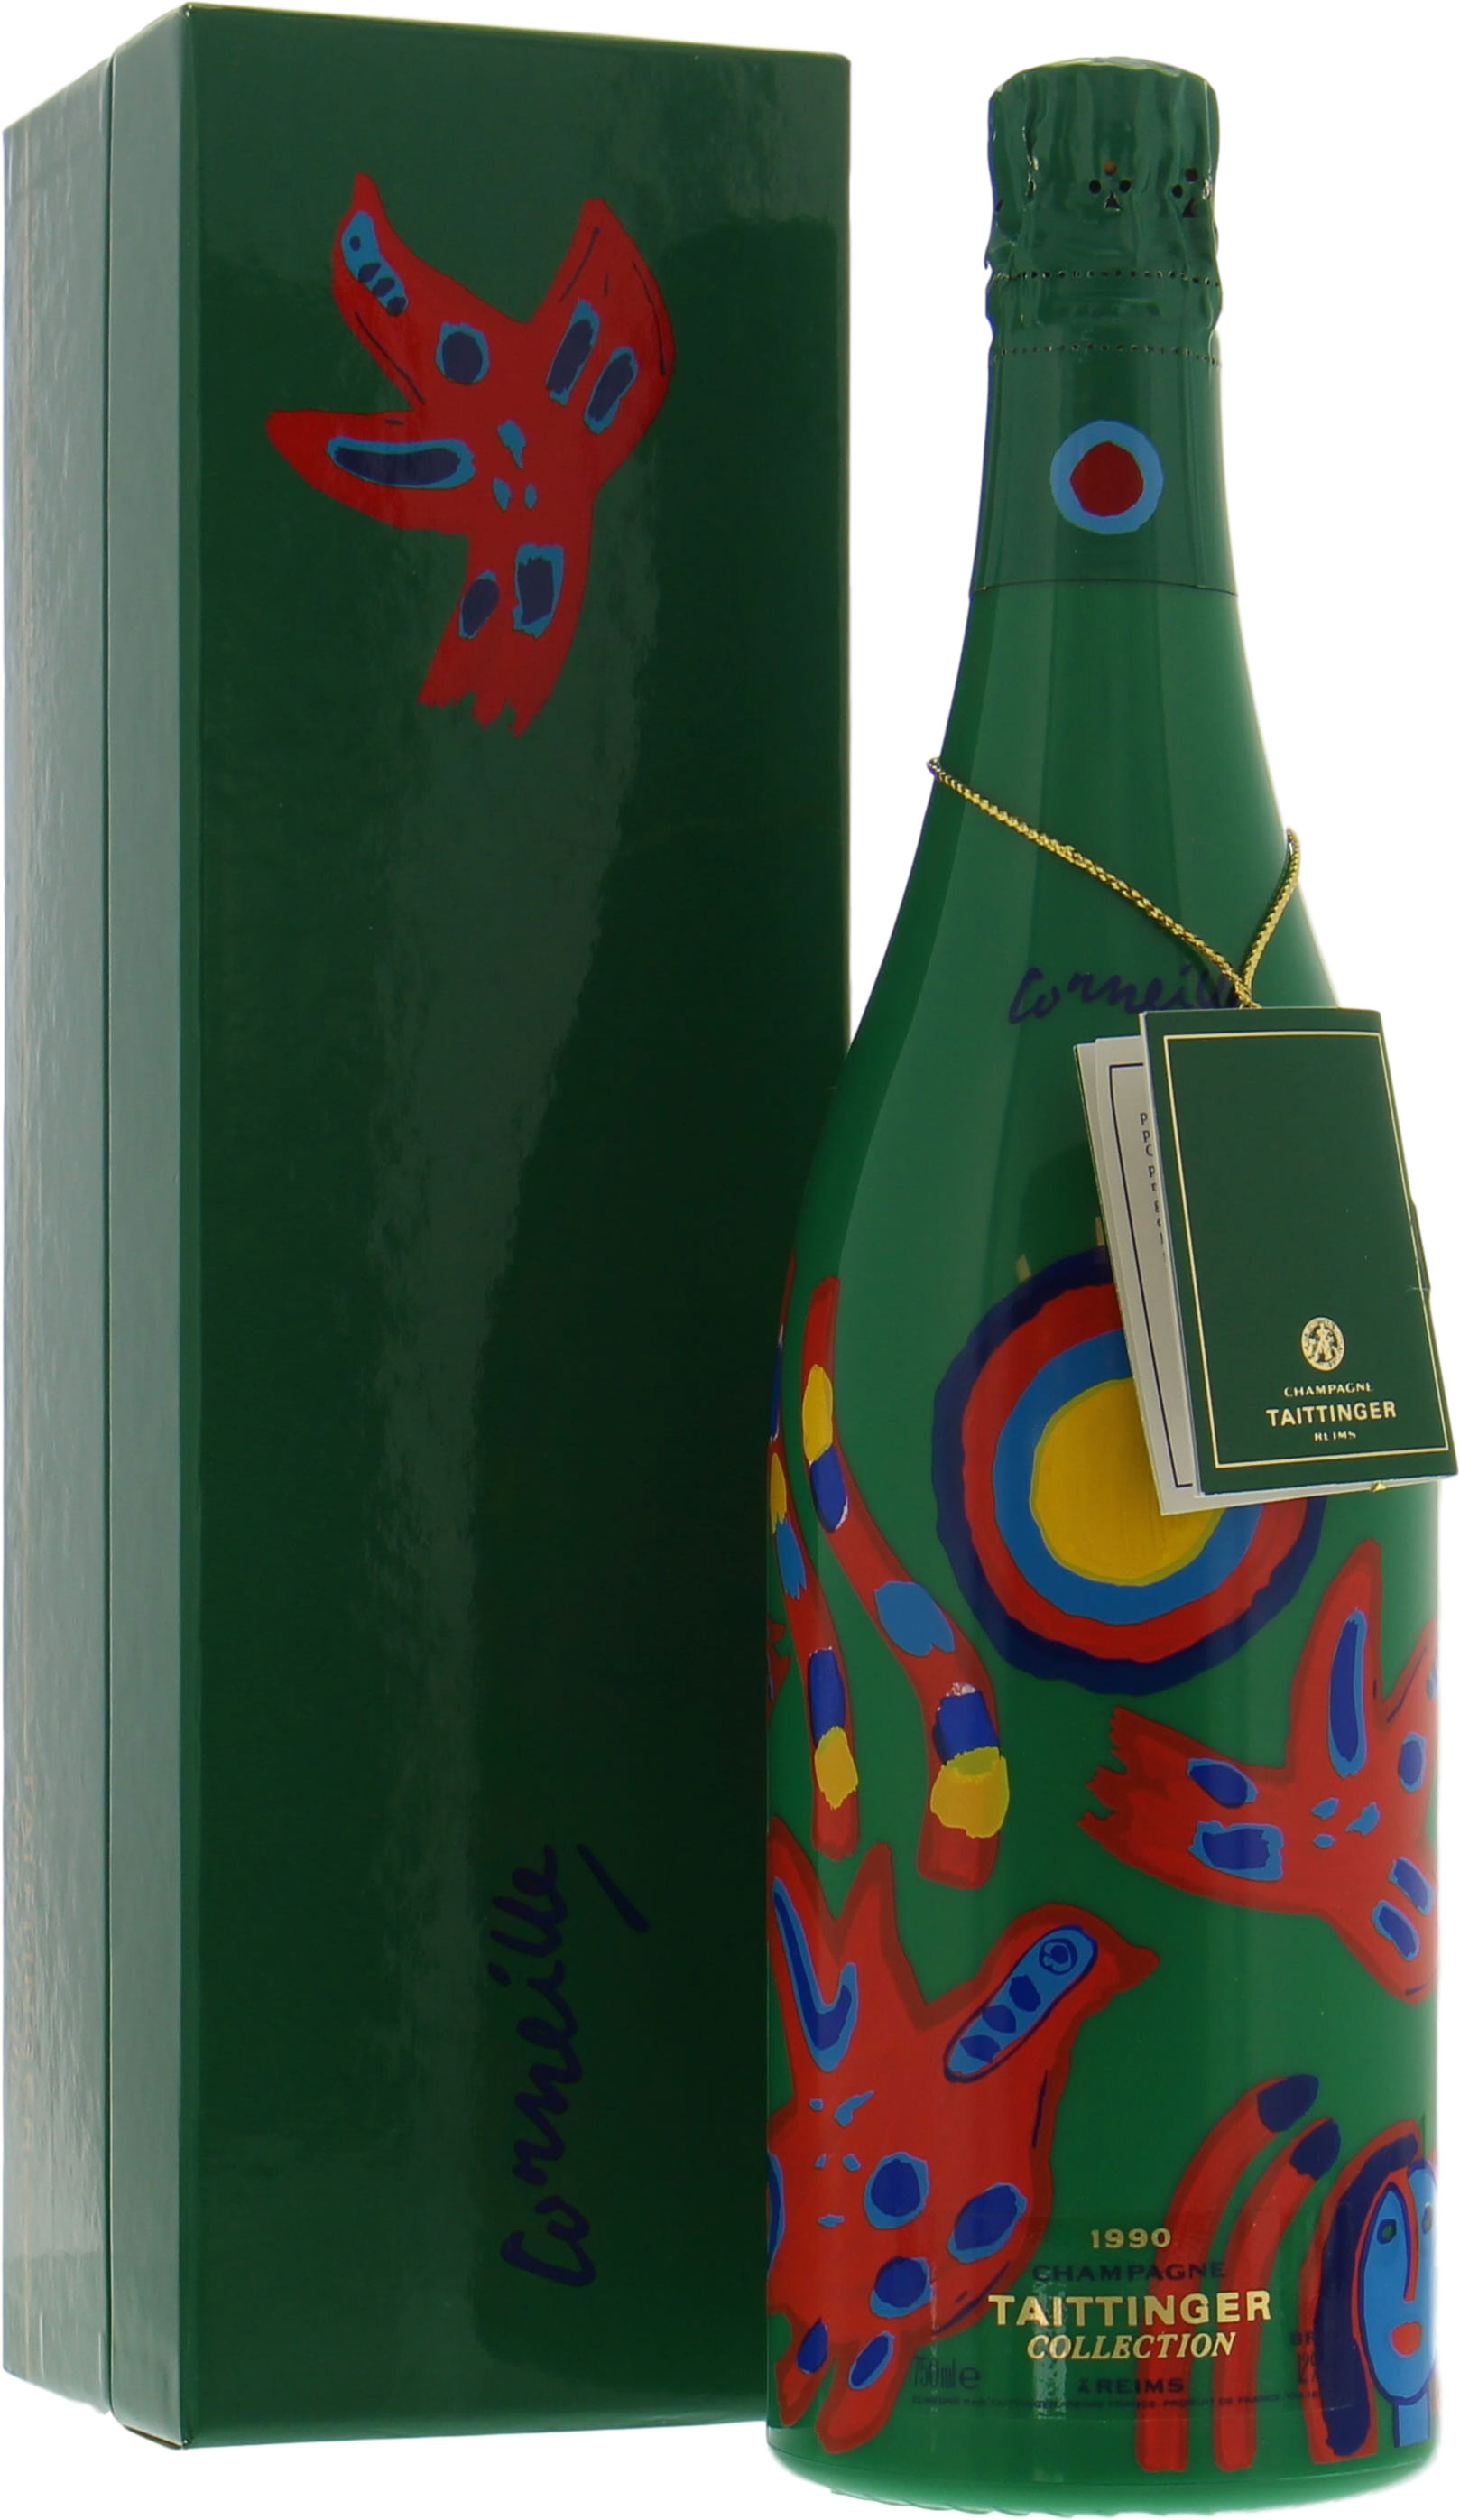 Taittinger - Collection Corneille 1990 From Original Wooden Case